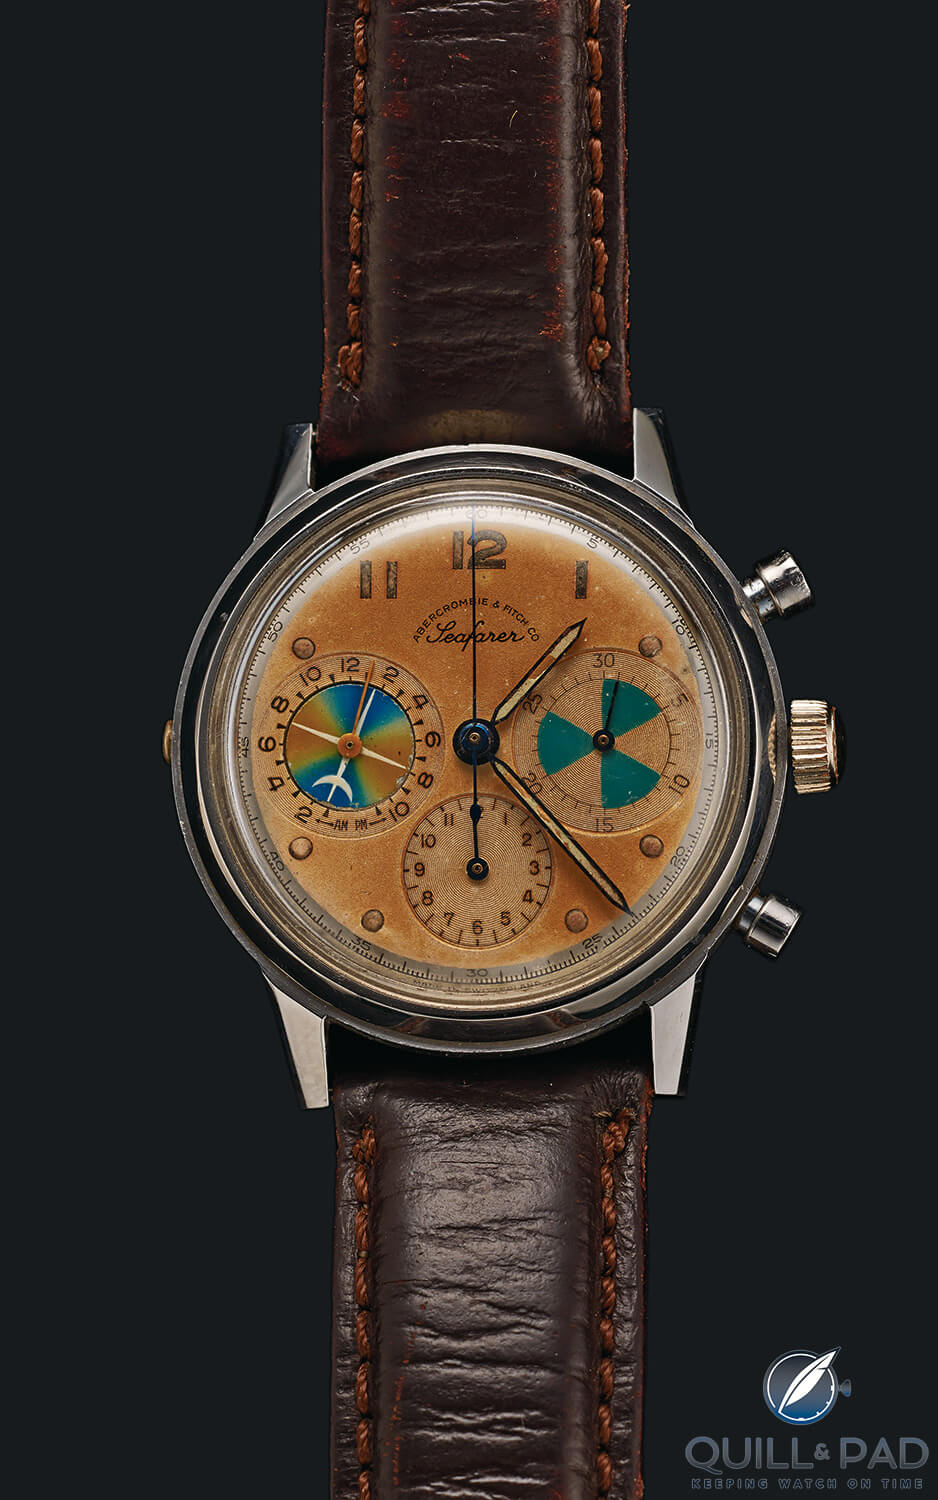 Heuer Abercrombie & Fitch Seafarer owned by Hamilton Powell of Crown & Caliber (excerpted from 'A Man and His Watch' by Matt Hranek, Artisan Books, copyright © 2017; photographs by Stephen Lewis)